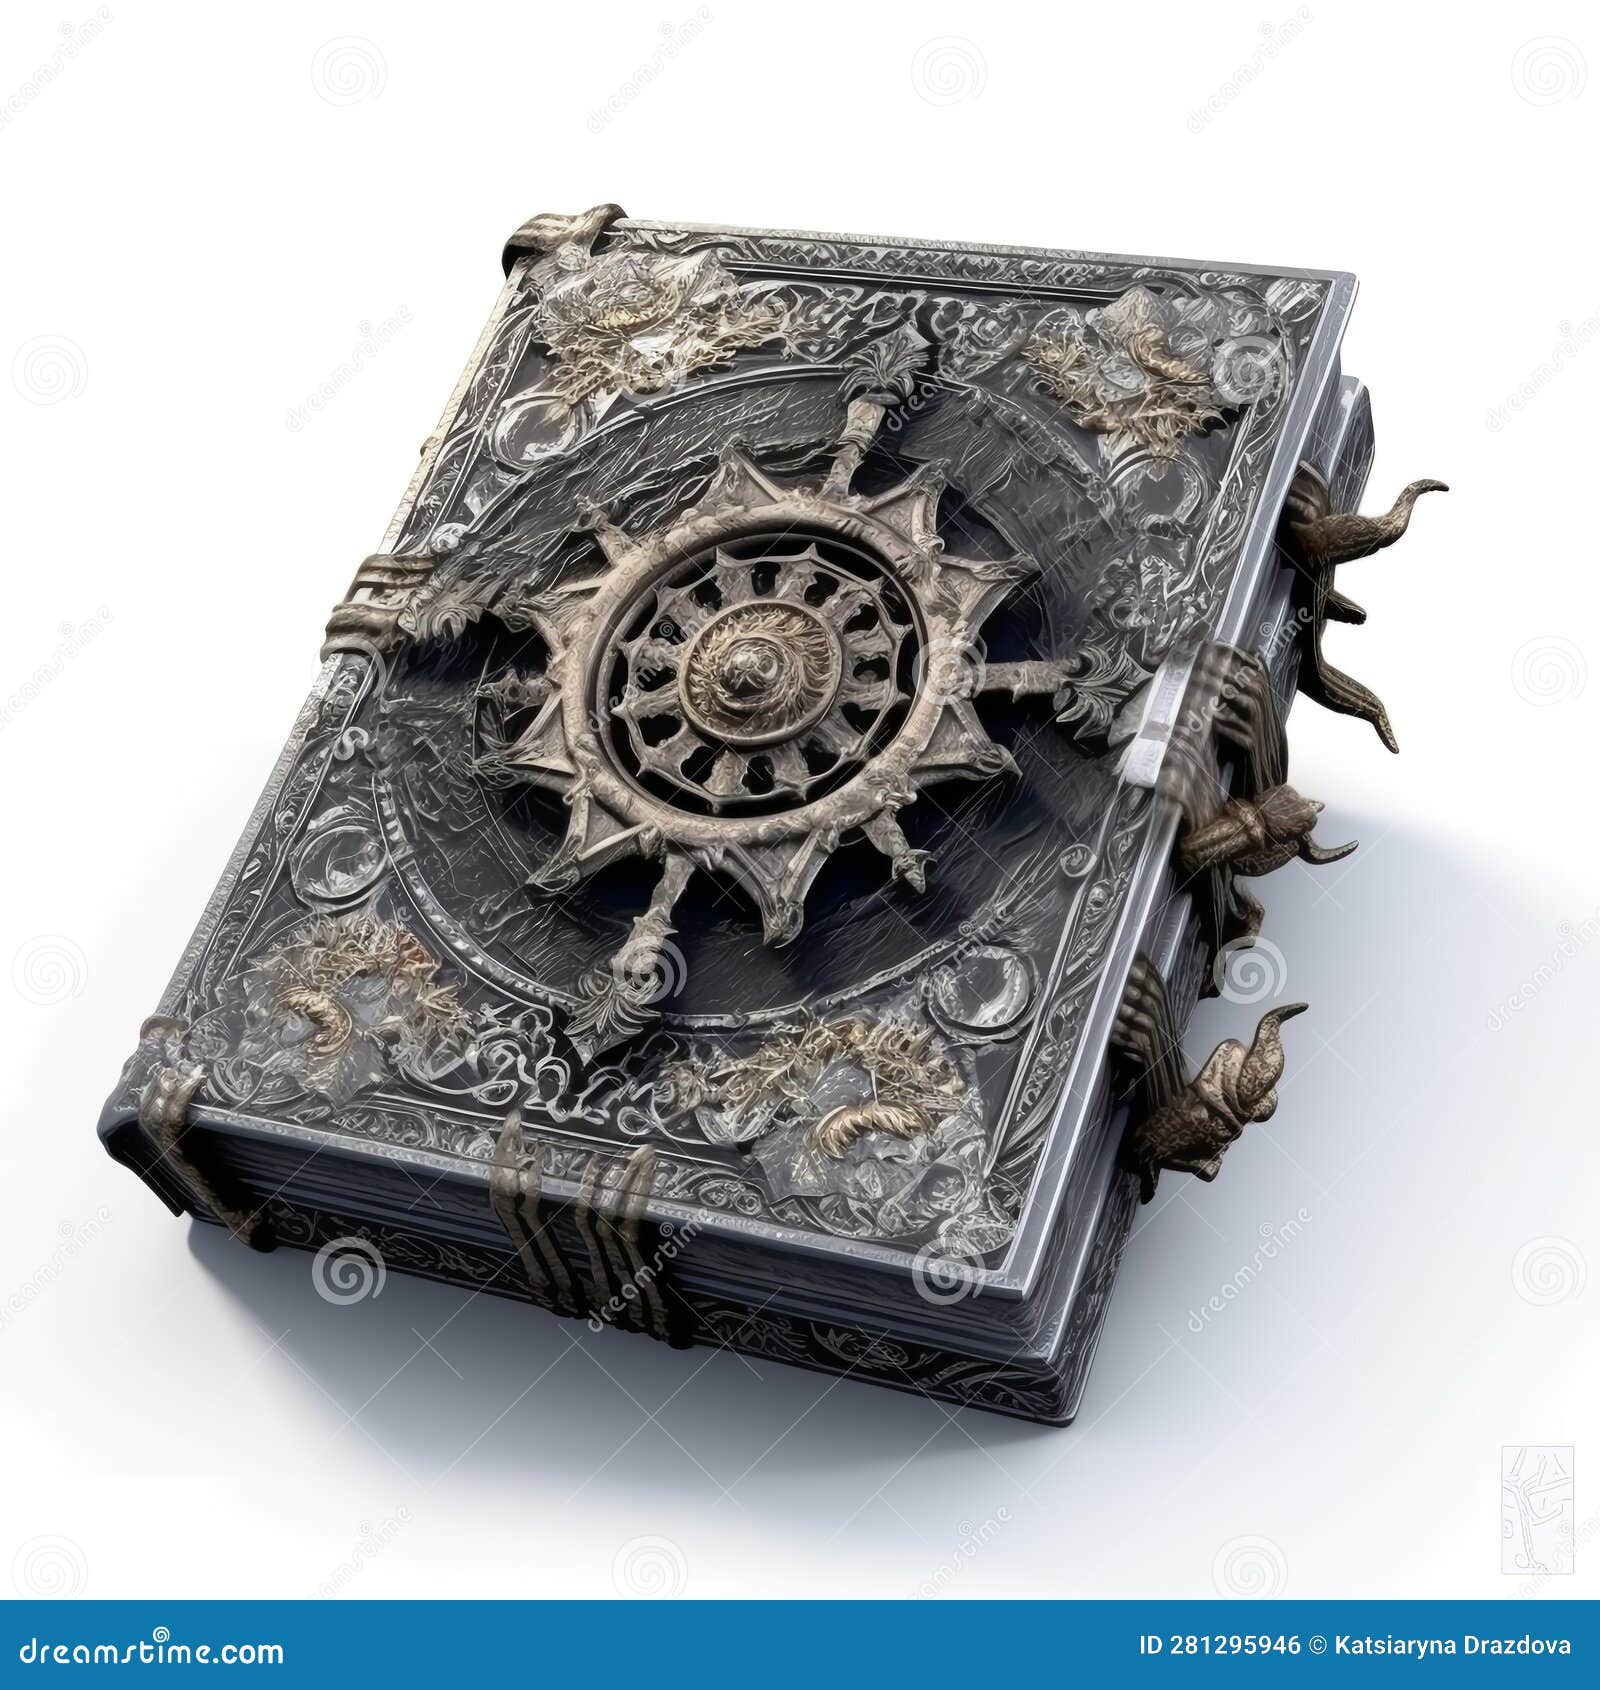 Spell book Images - Search Images on Everypixel